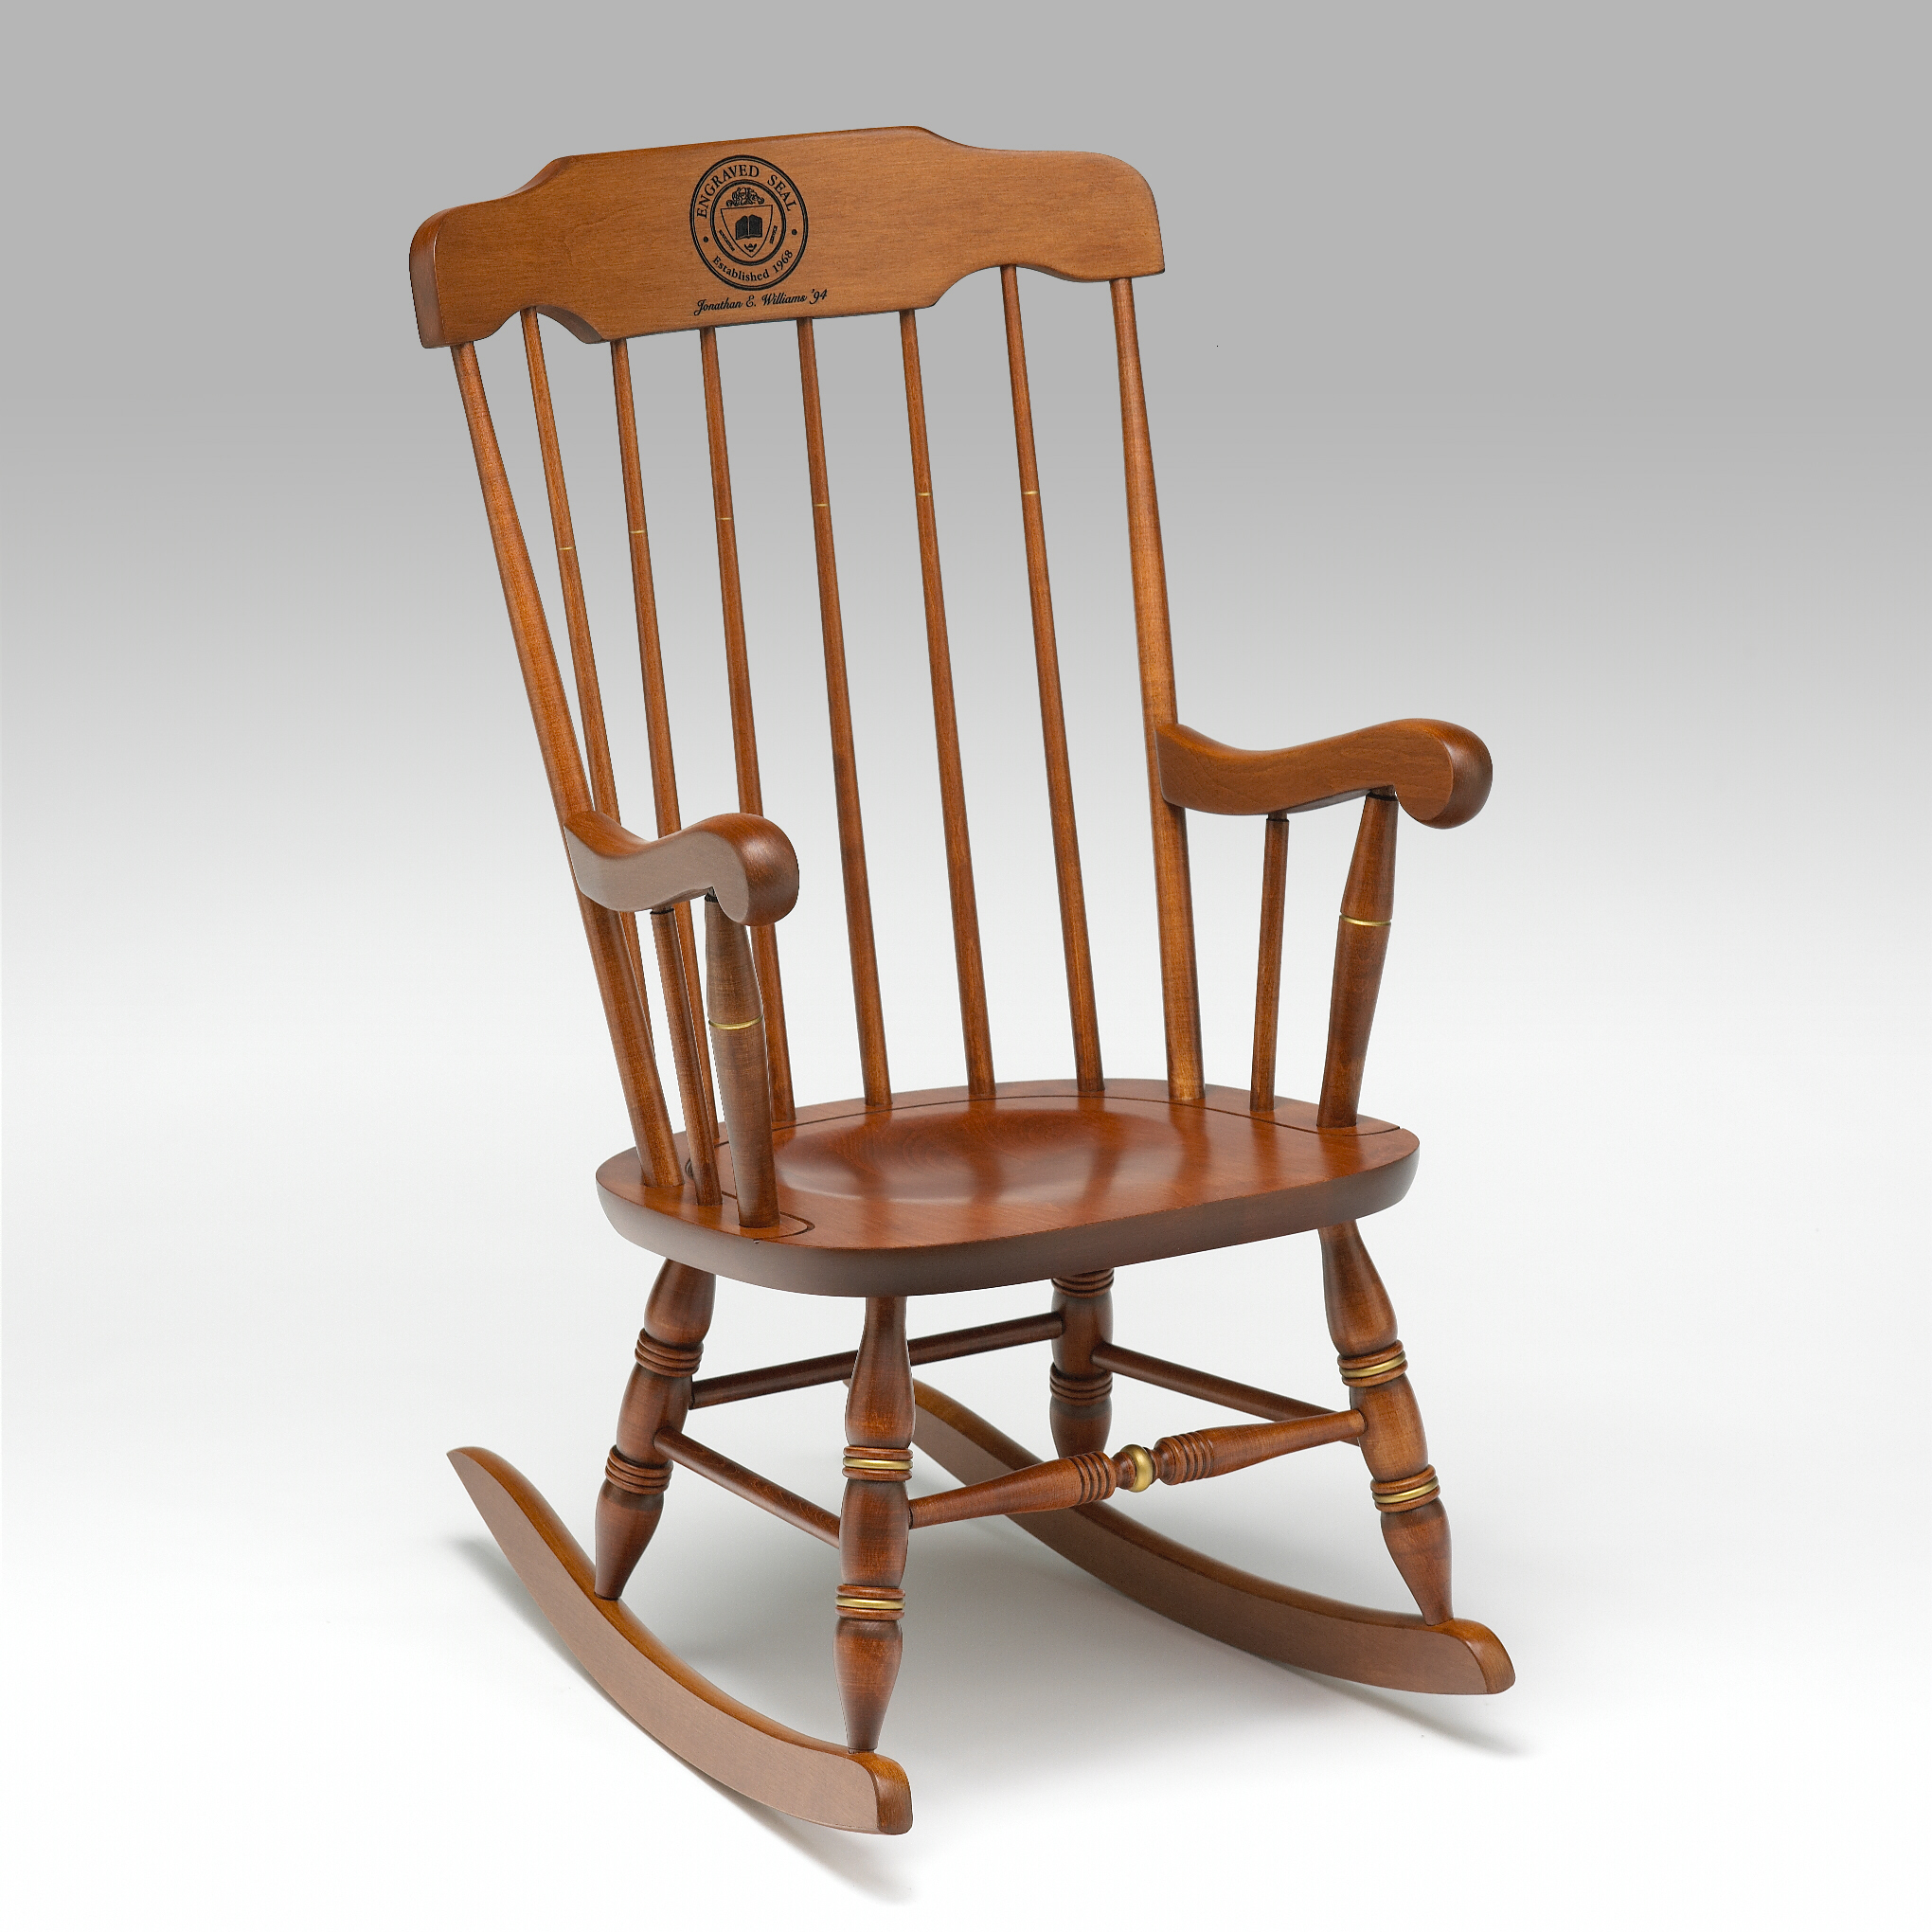 Help me safely disassemble a rocking chair - furniture DIT